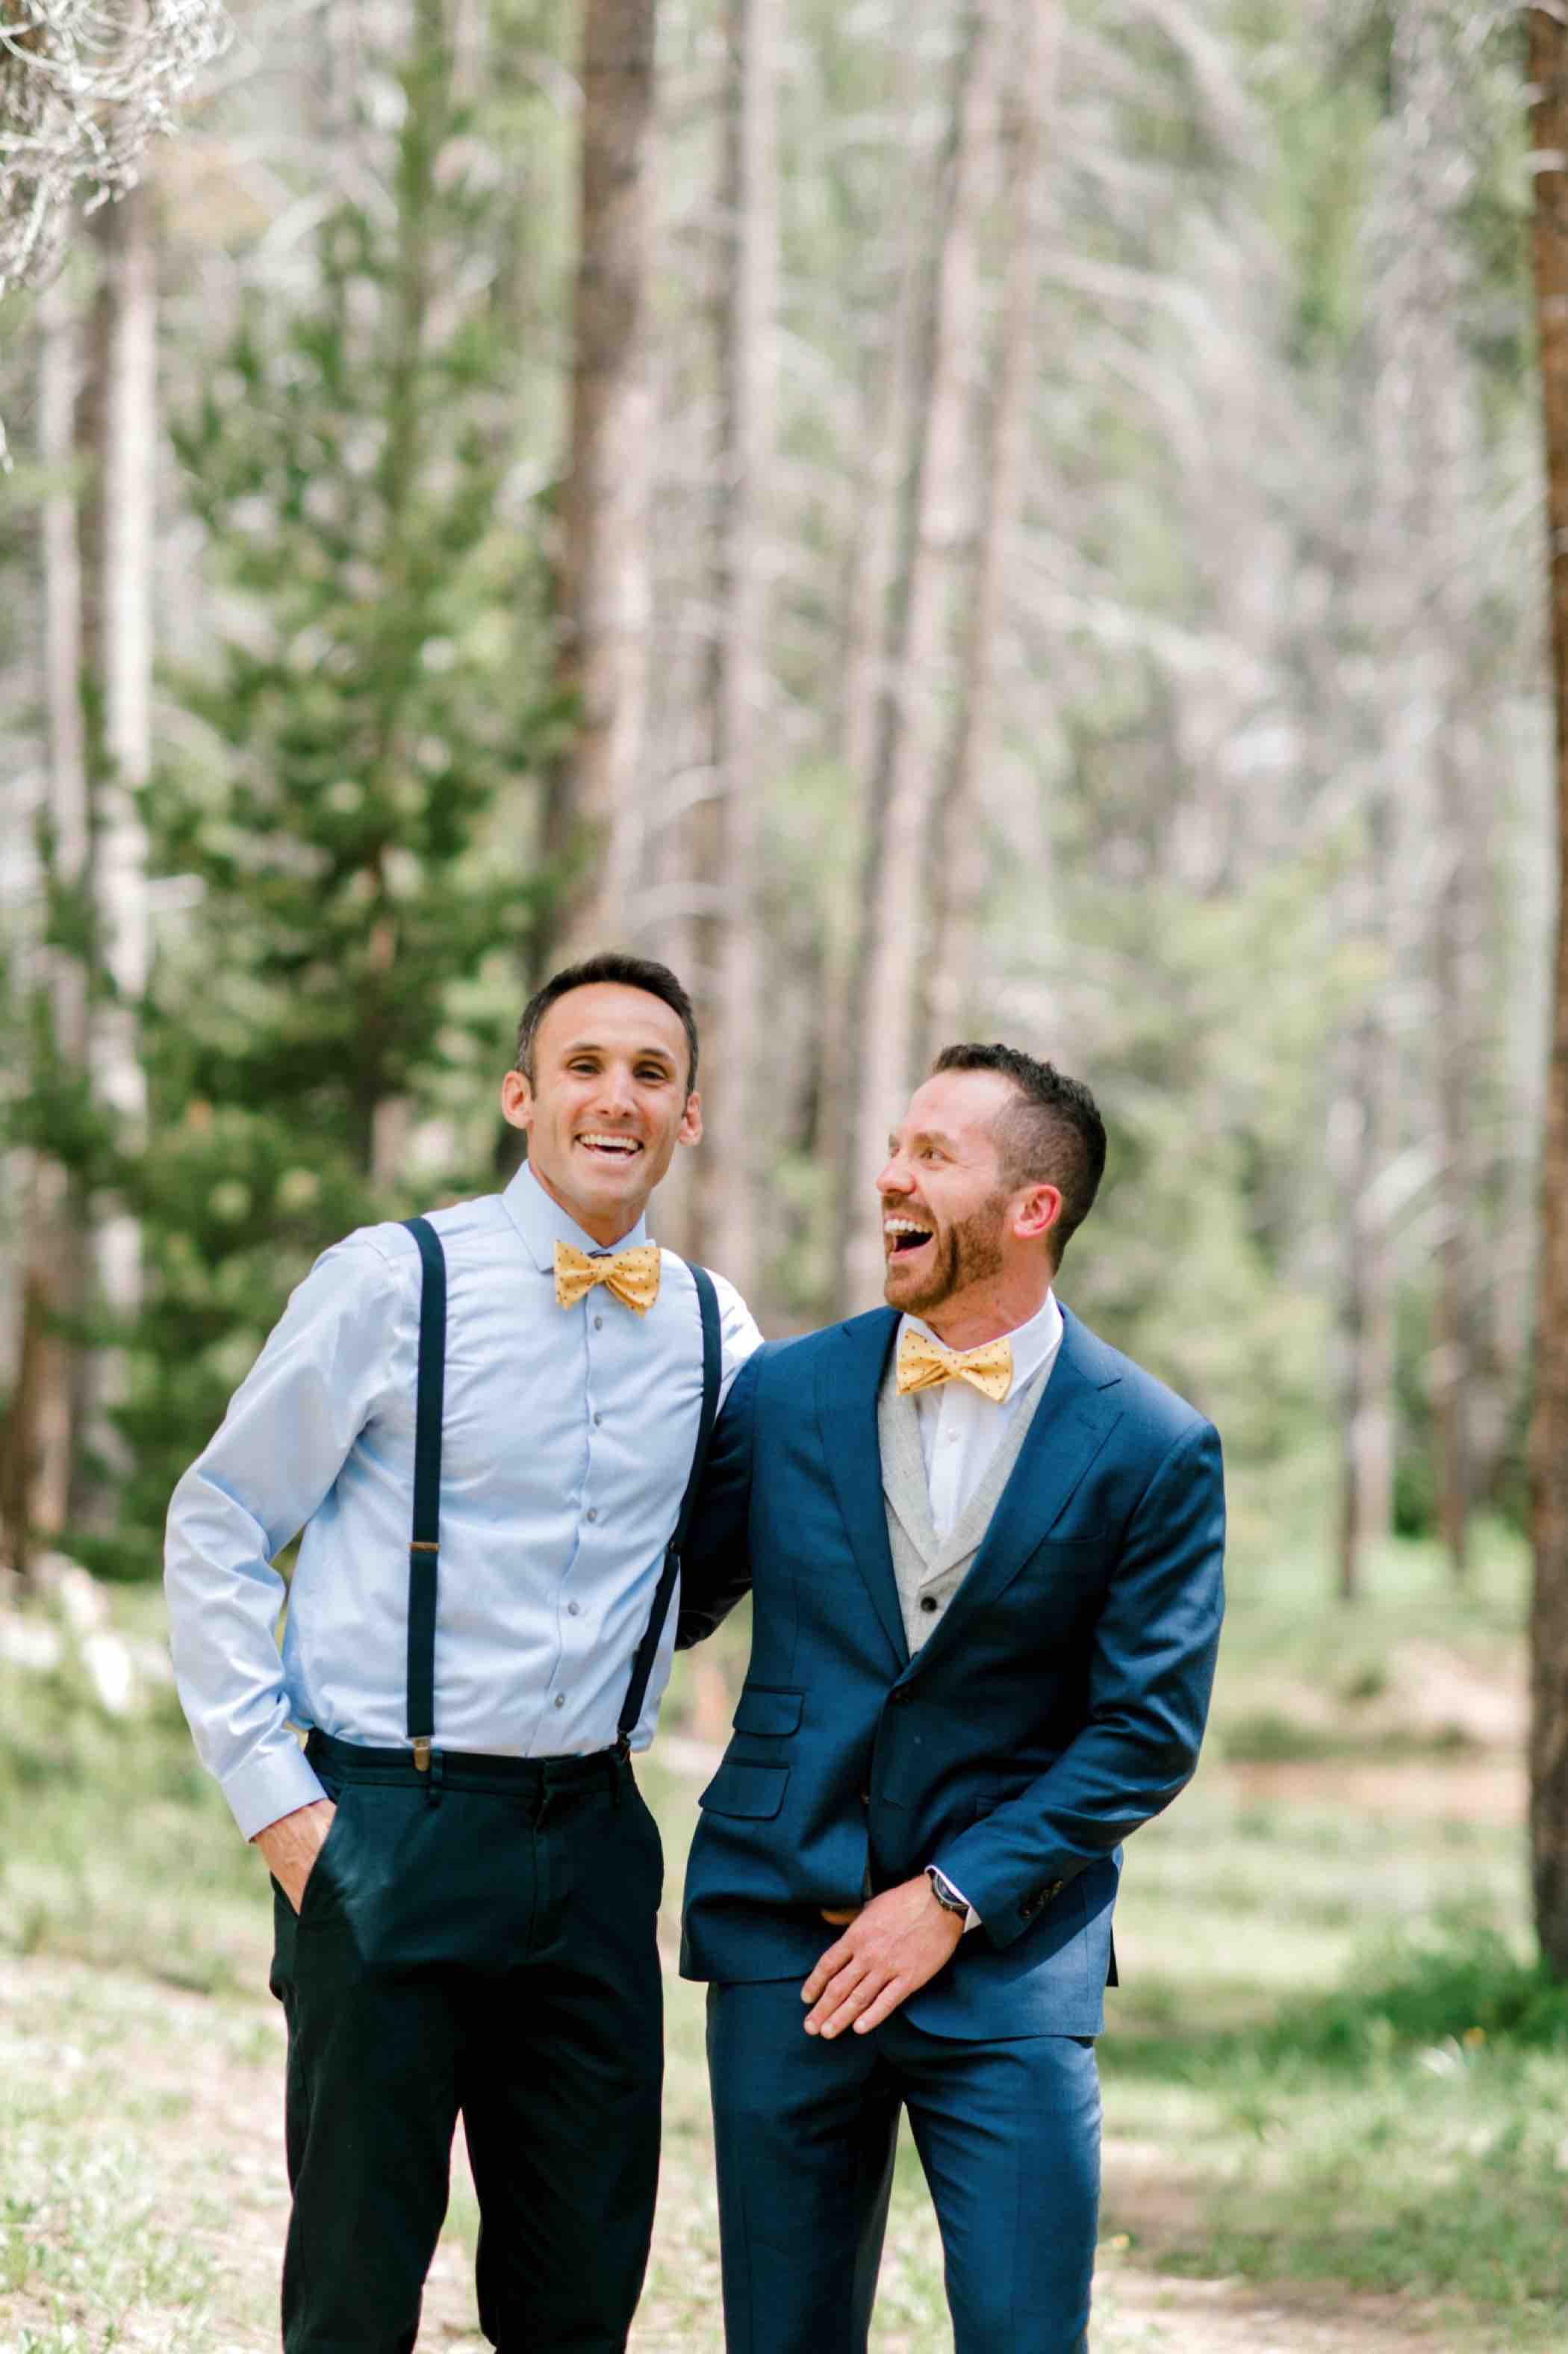 Groomsmen photos outside Piney River Ranch in Vail in the Colorado Rocky Mountains. Photo by Ali and Garrett, Romantic, Adventurous, Nostalgic Wedding Photographers.